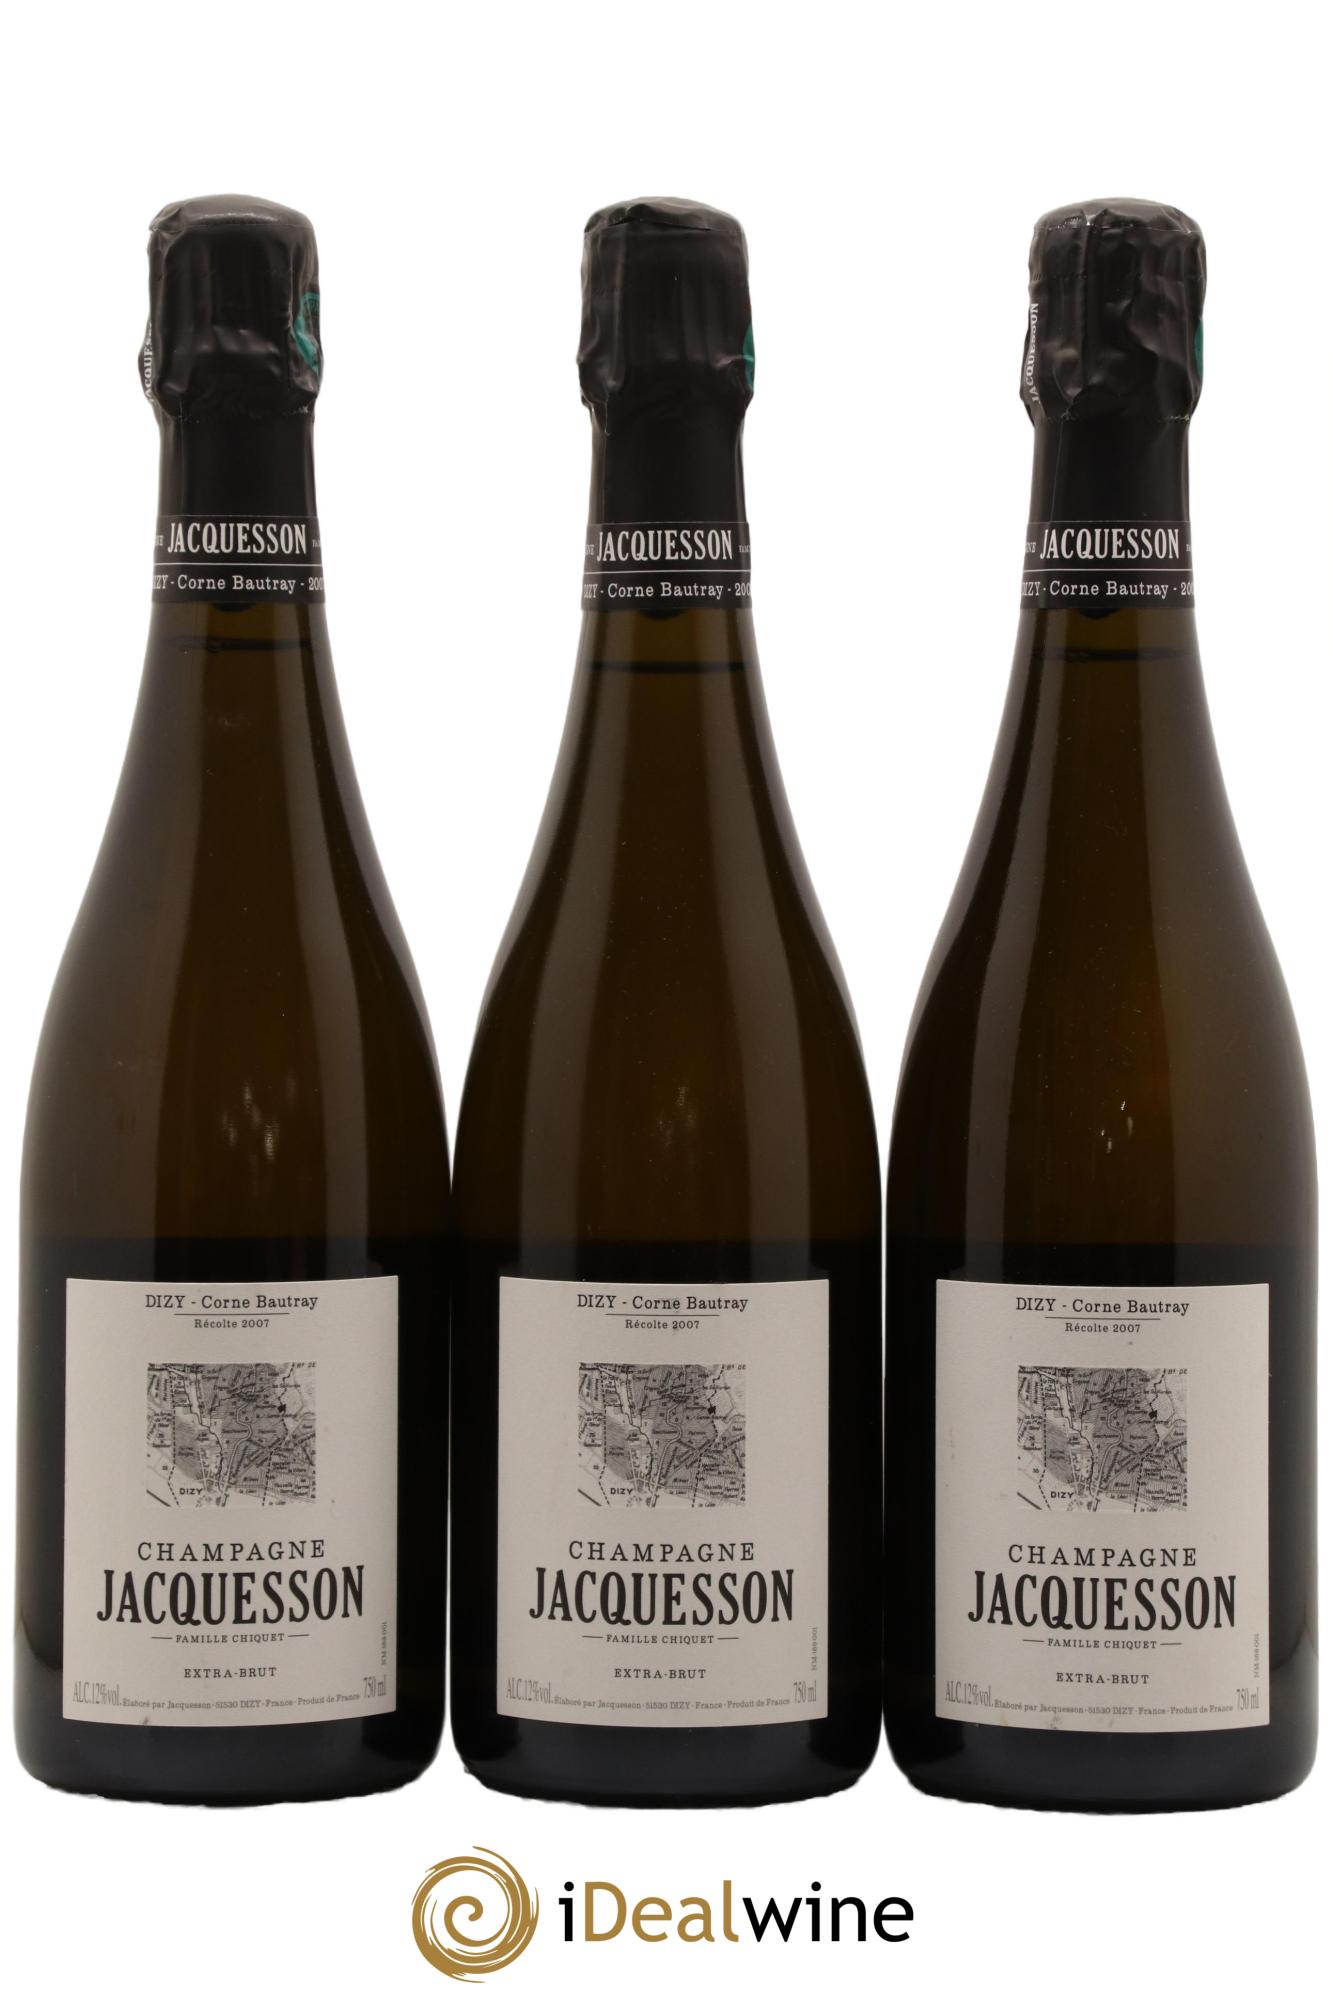 Champagne Jacquesson Dizy Corne Bautray Extra Brut (Blanc effervescent)